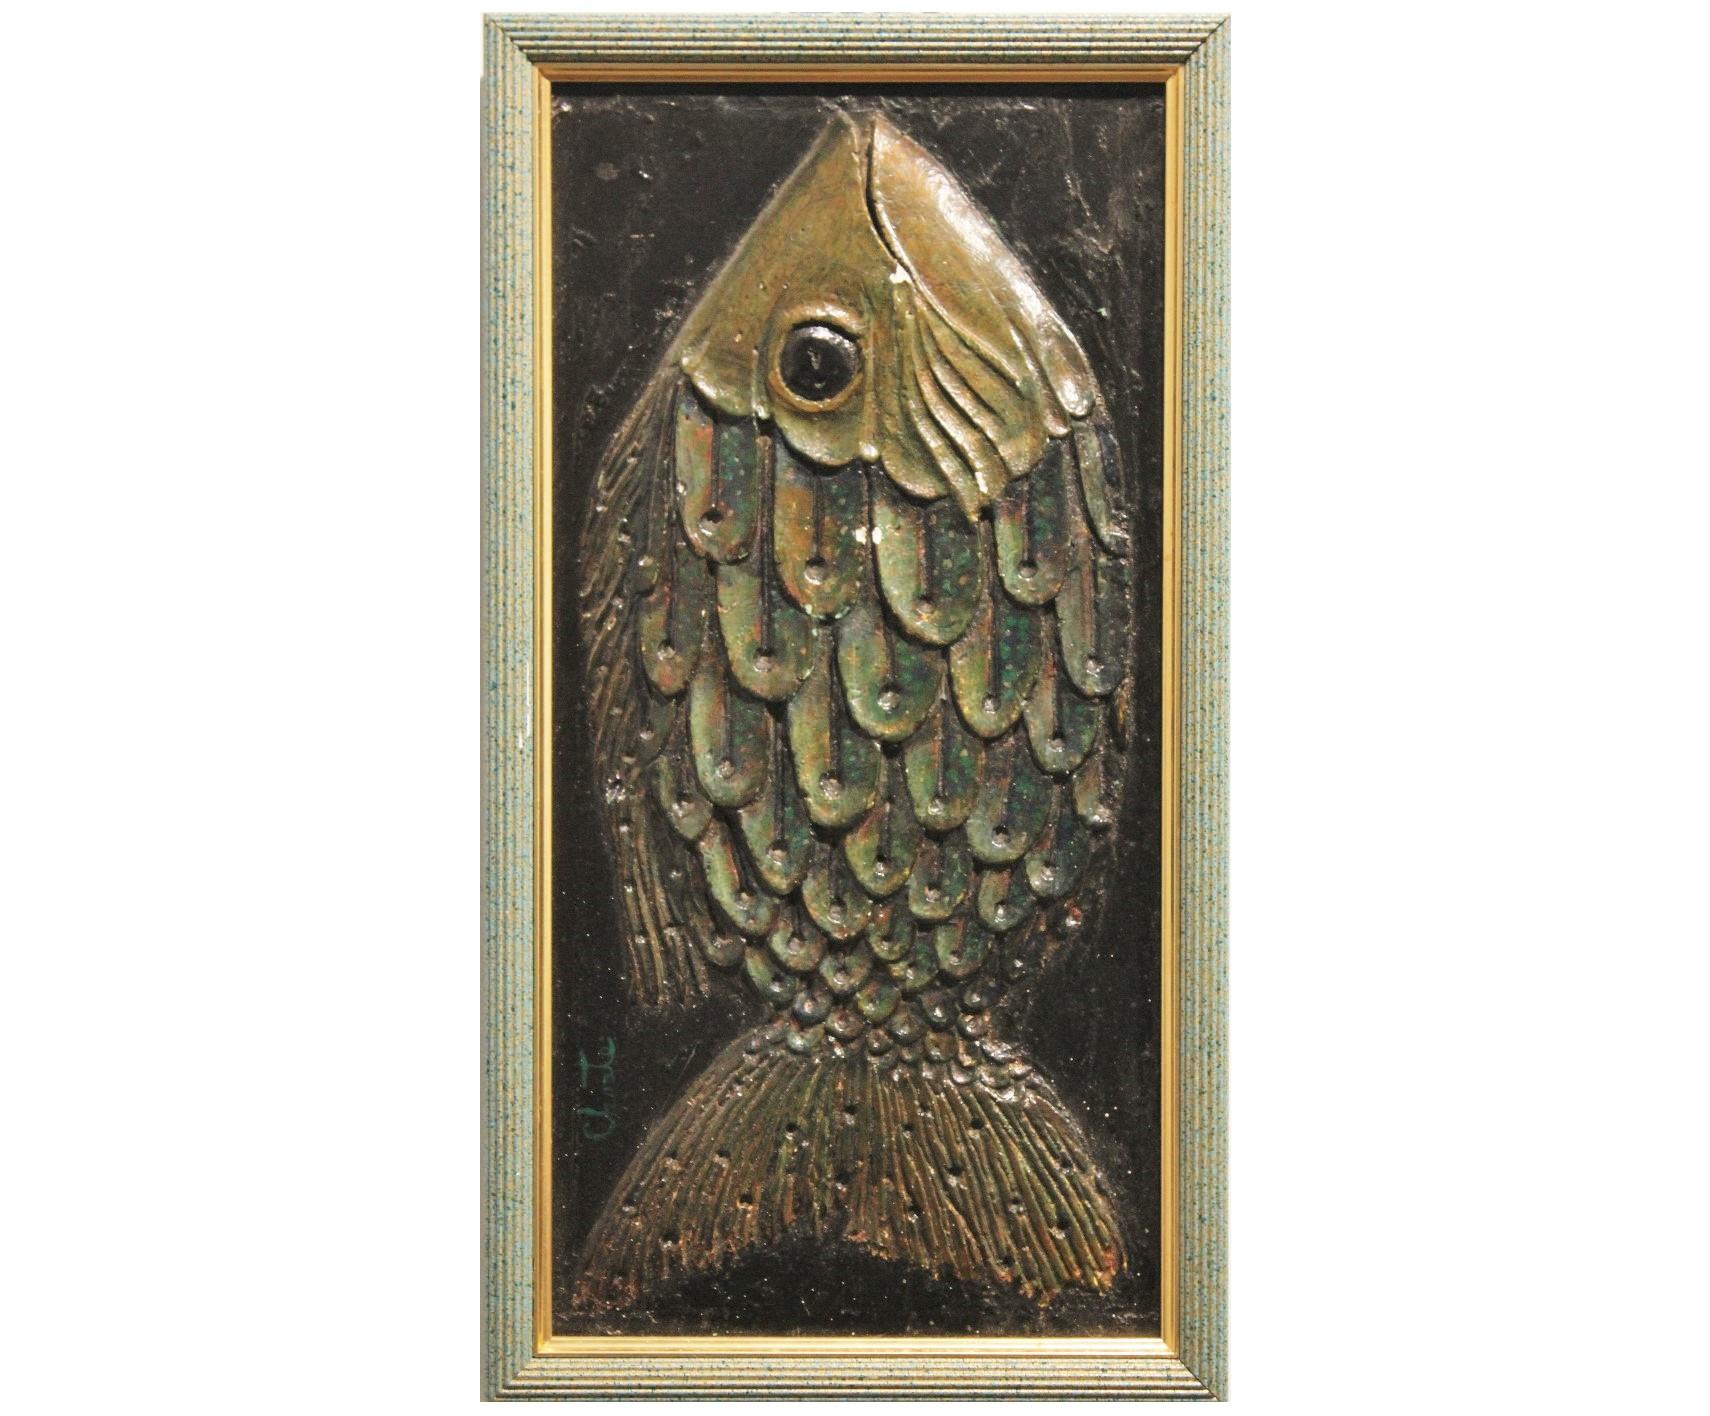 Flounder Fish Relief in Green Tones - Art by Nathaniel Choate